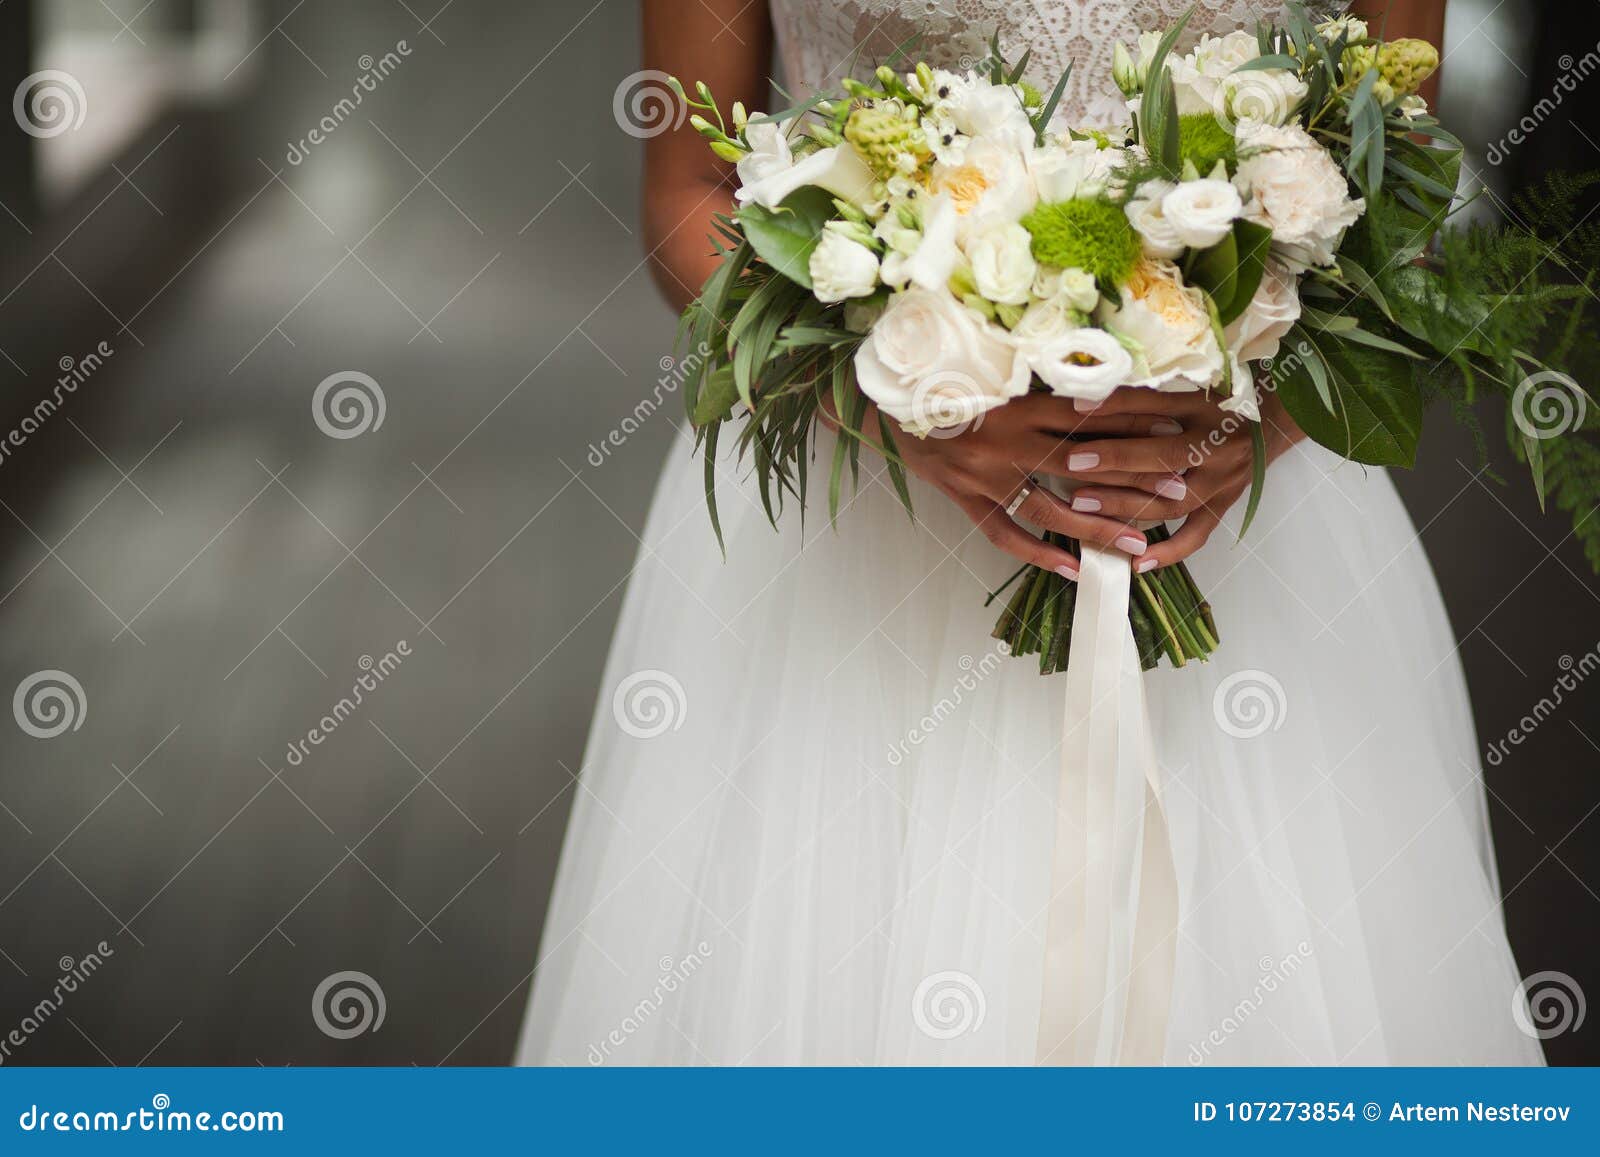 wedding day. beautiful bride with wedding bouquet of flowers in hands